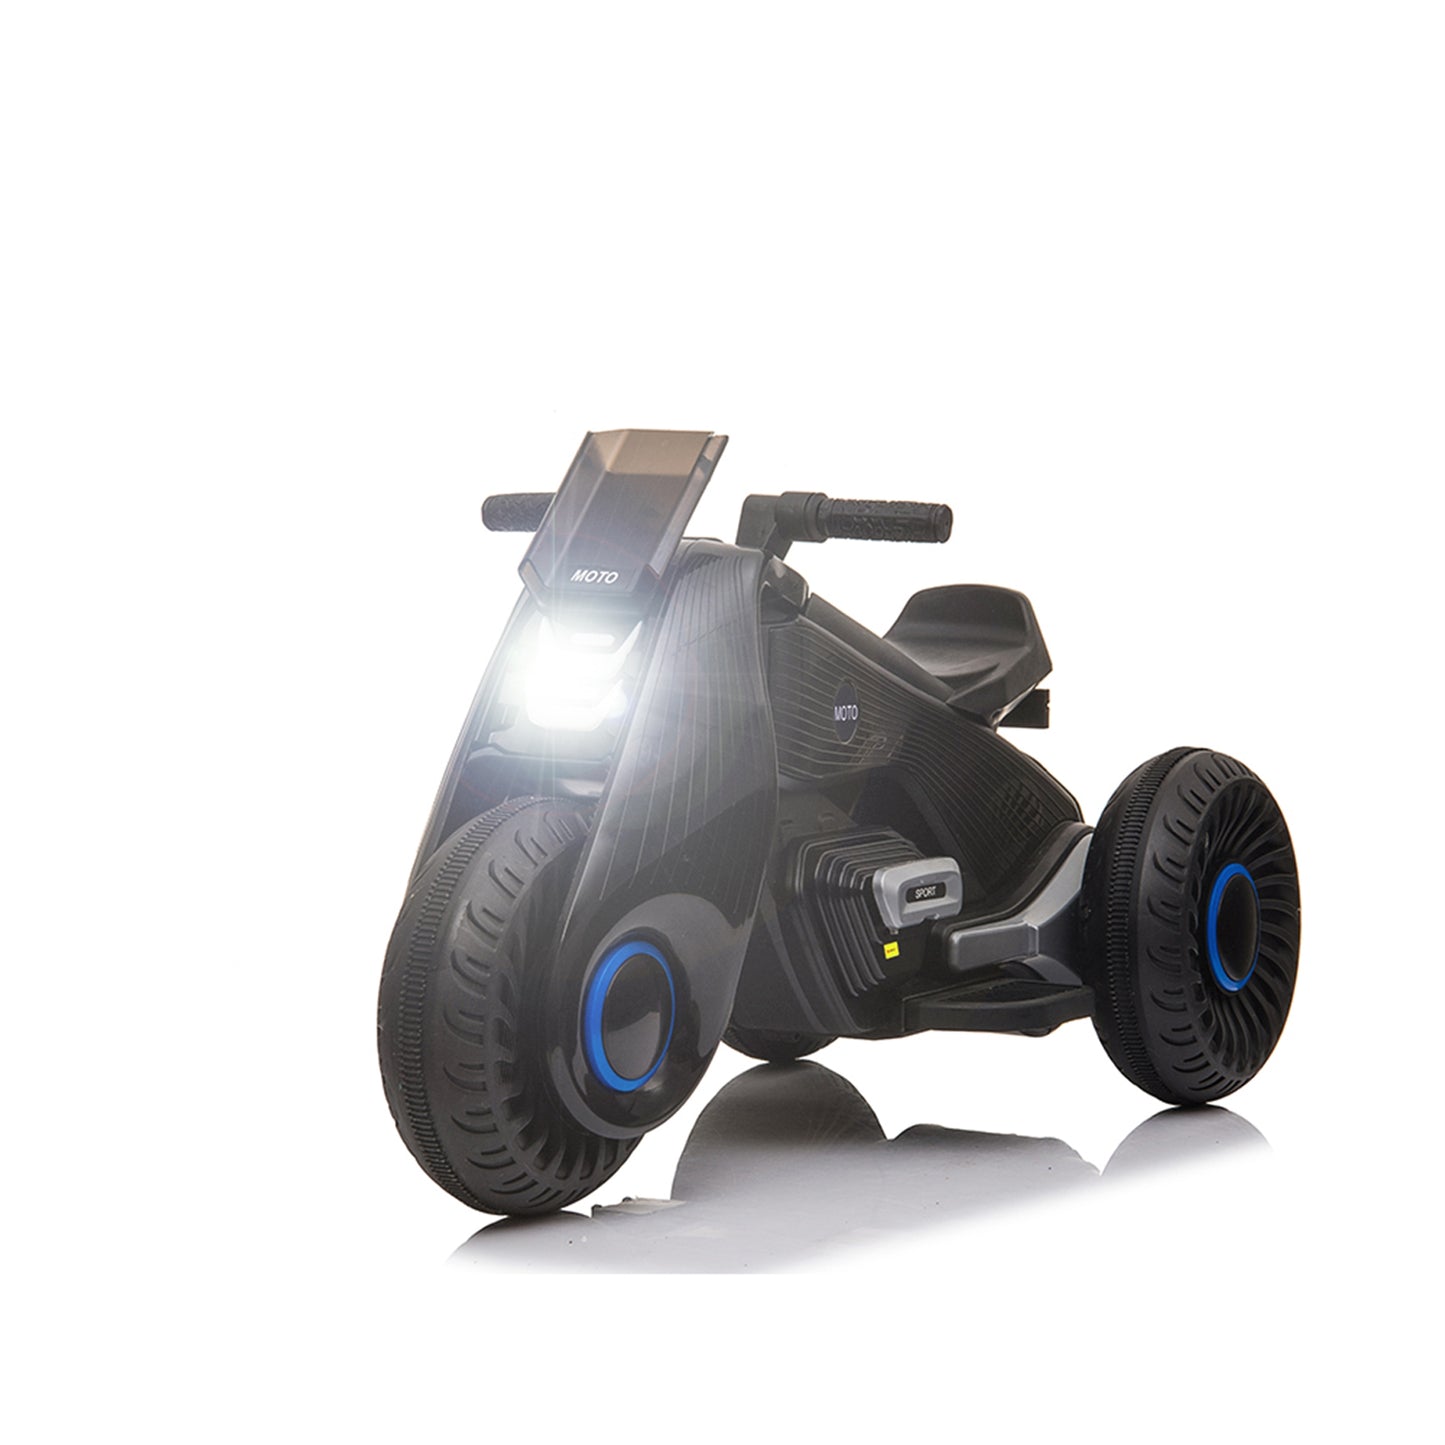 Kids Ride on Motorcycle, 6V Battery Powered Ride on Toy with LED Headlight, Music and Pedal, Electric Motorcycle Vehicle Toy for Boys and Girls, Fits for Road, Lawn, Garden, Park, C10